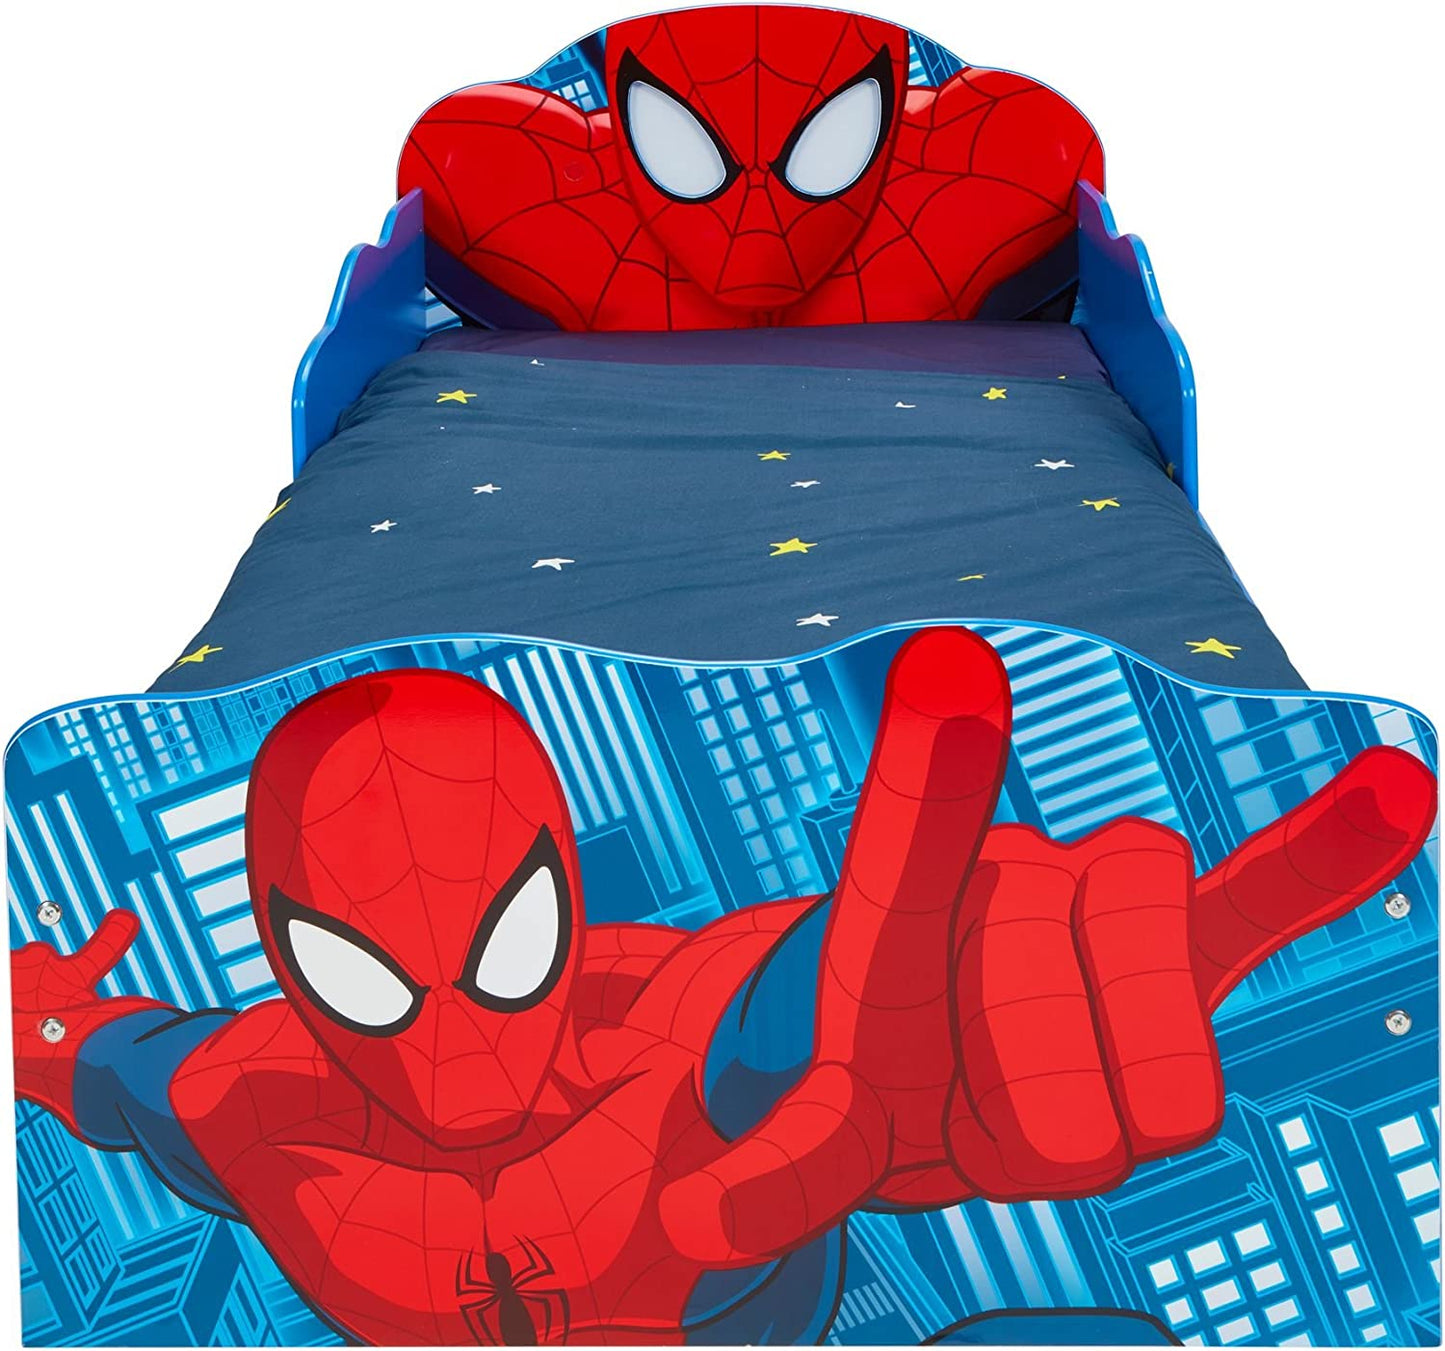 Hellohome 509 SDR Spiderman Children'S Bed with Bright Eyes and Substrate Container, Wood, Red, 142 X 77 X 64 Cm